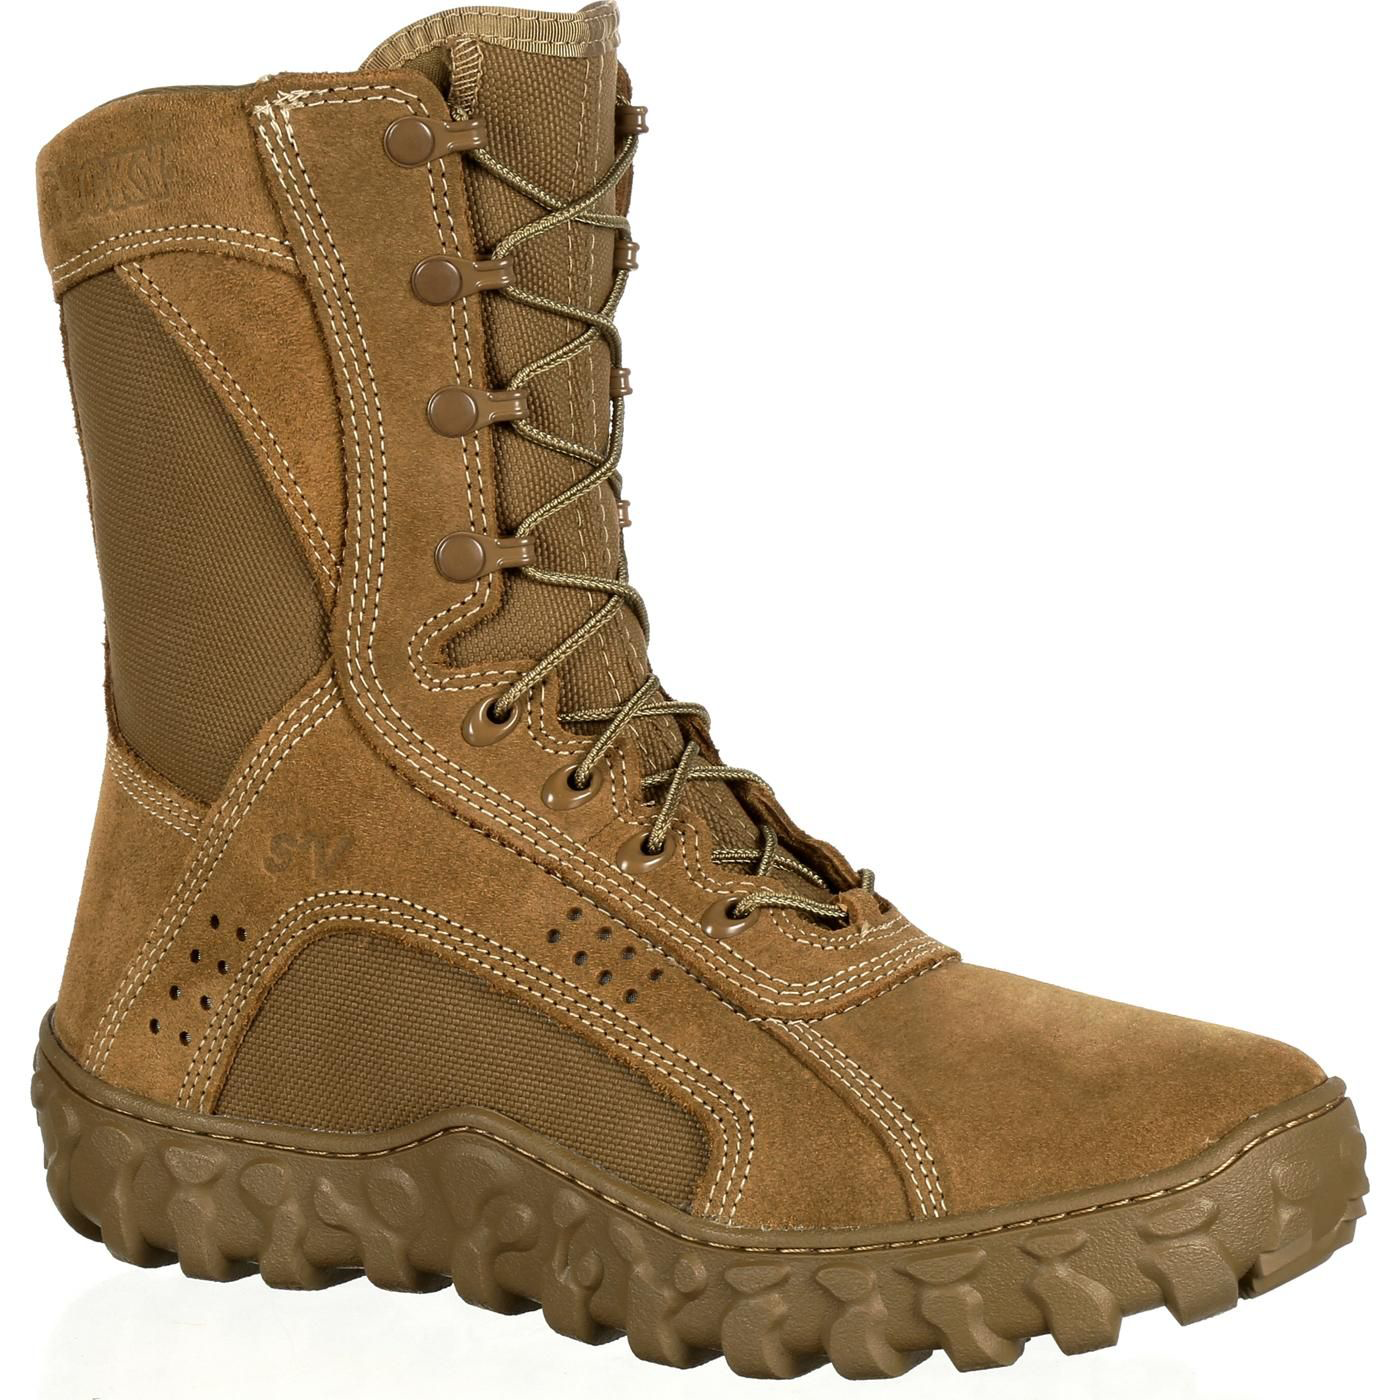 Rocky S2V Tactical Military Boots for Men - Coyote Brown - 7.5W